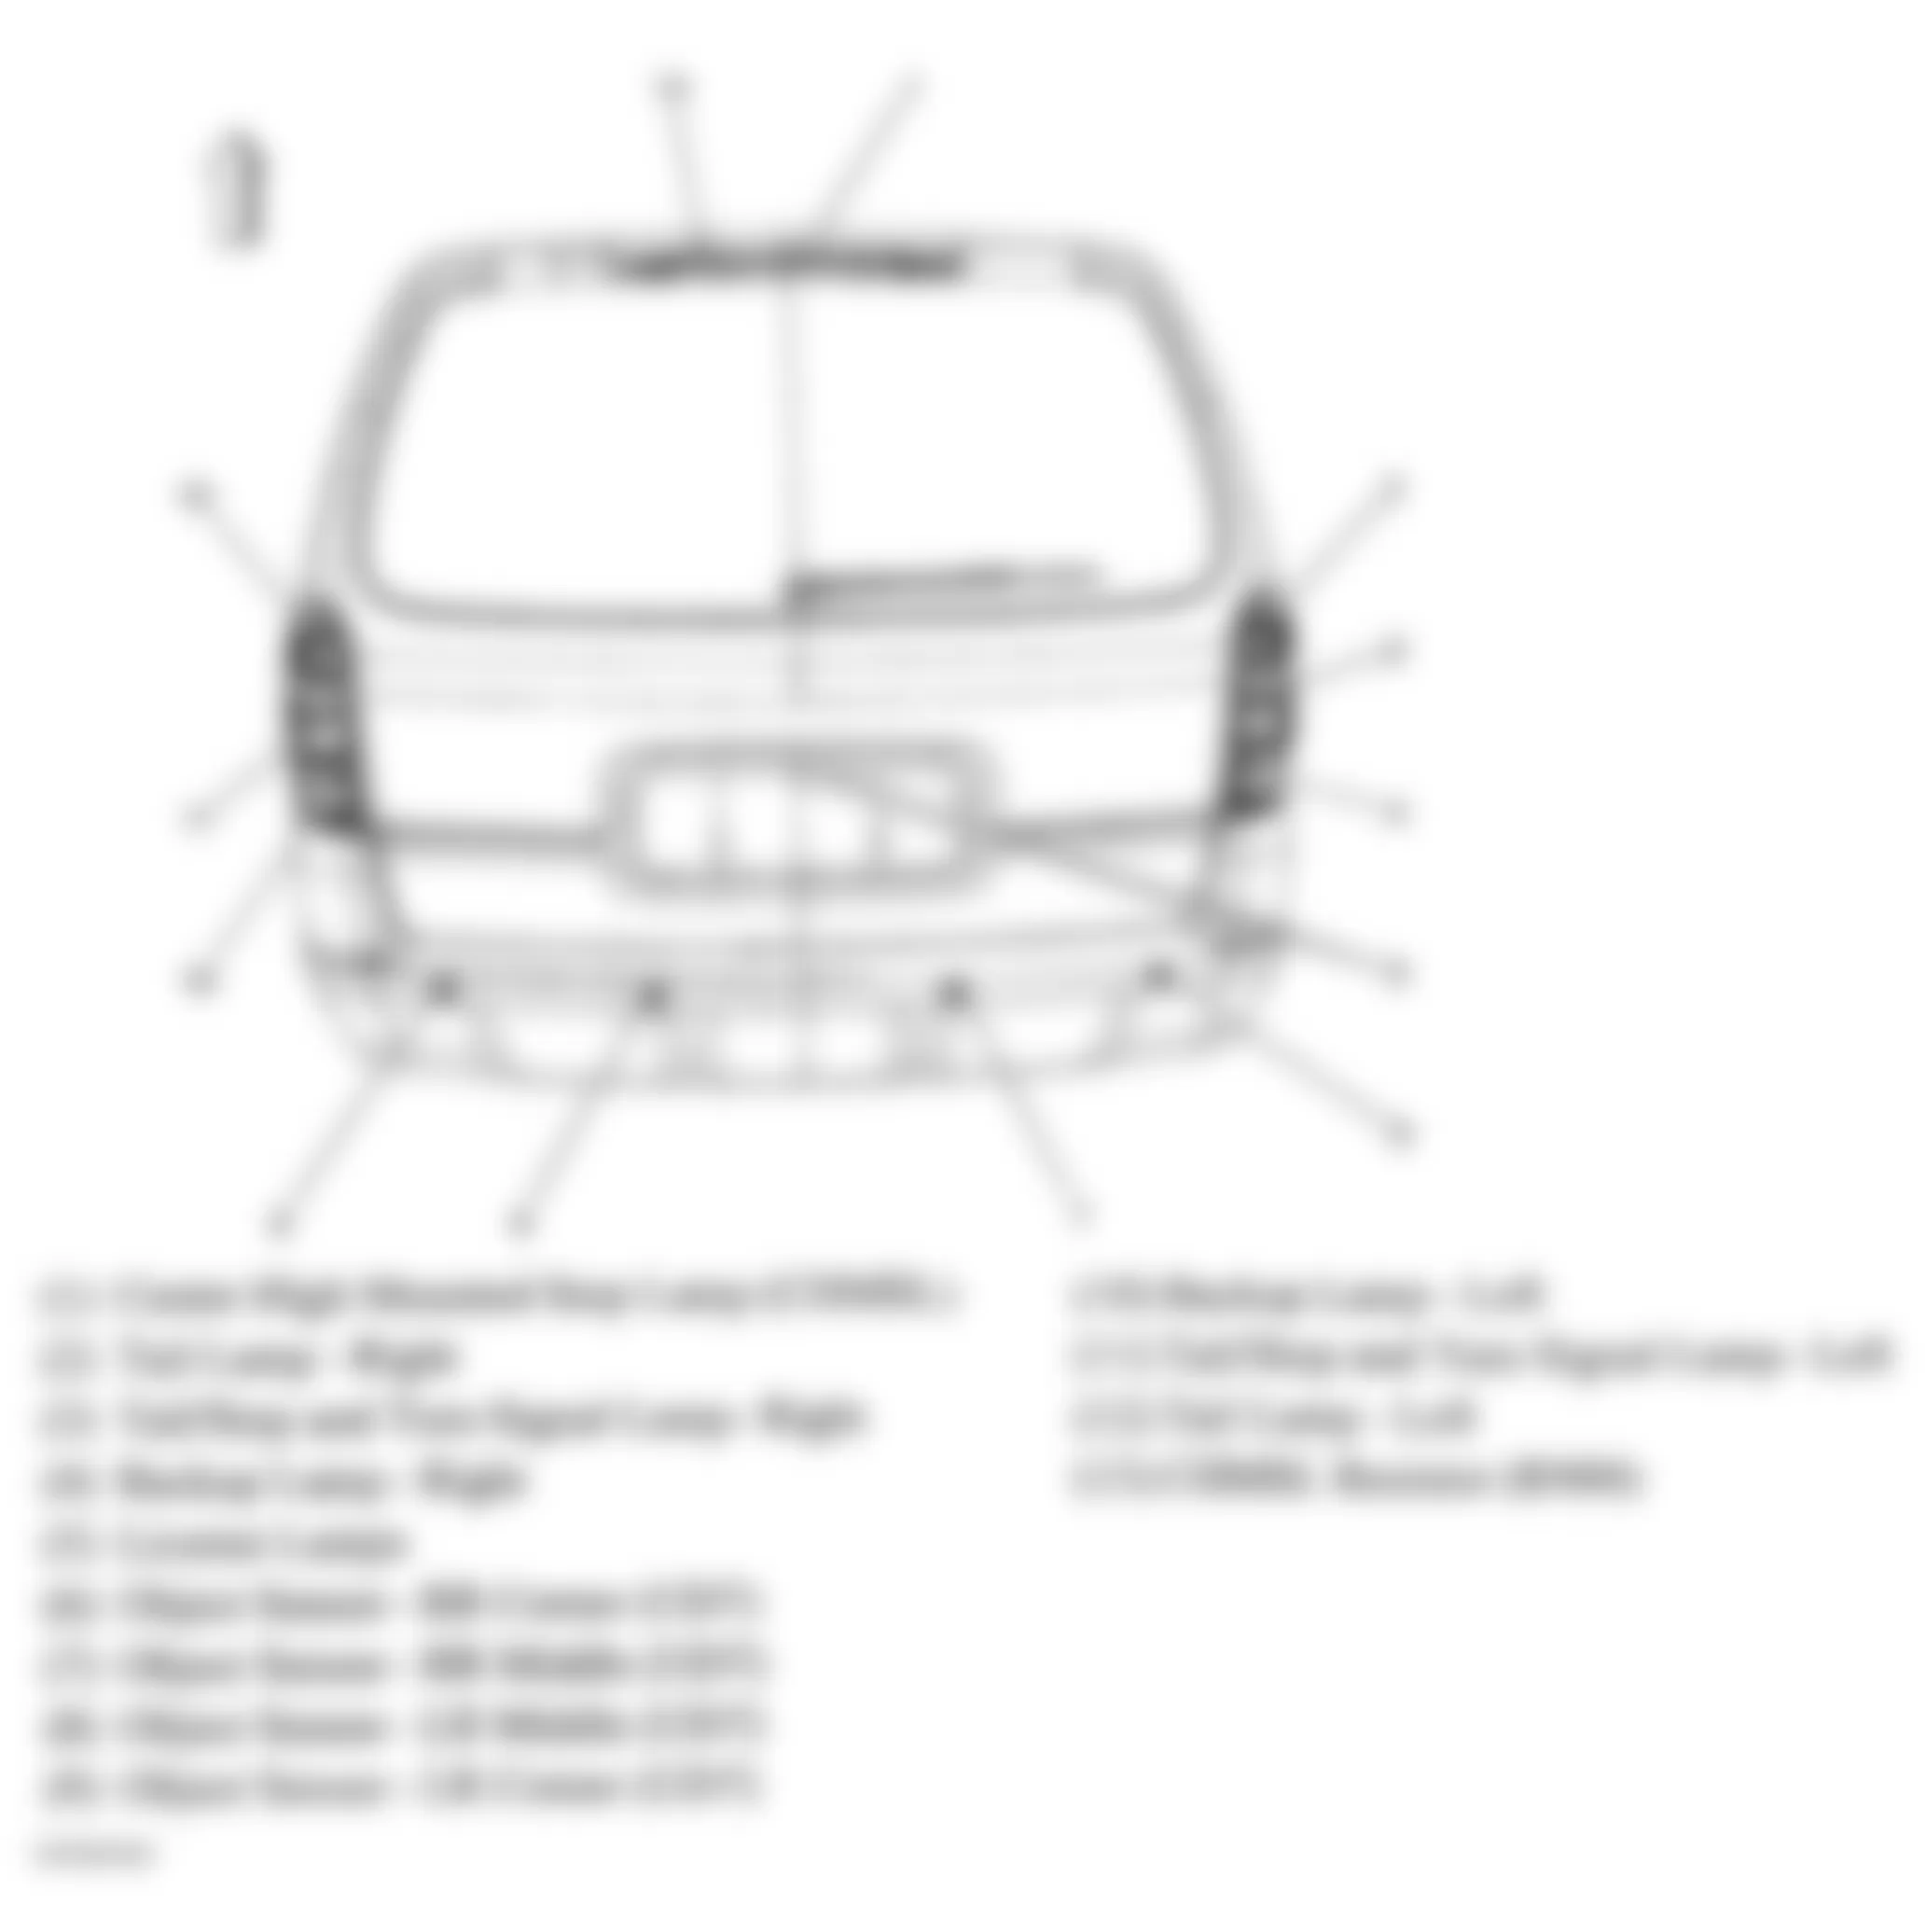 Buick Terraza CXL 2005 - Component Locations -  Tailgate Assembly